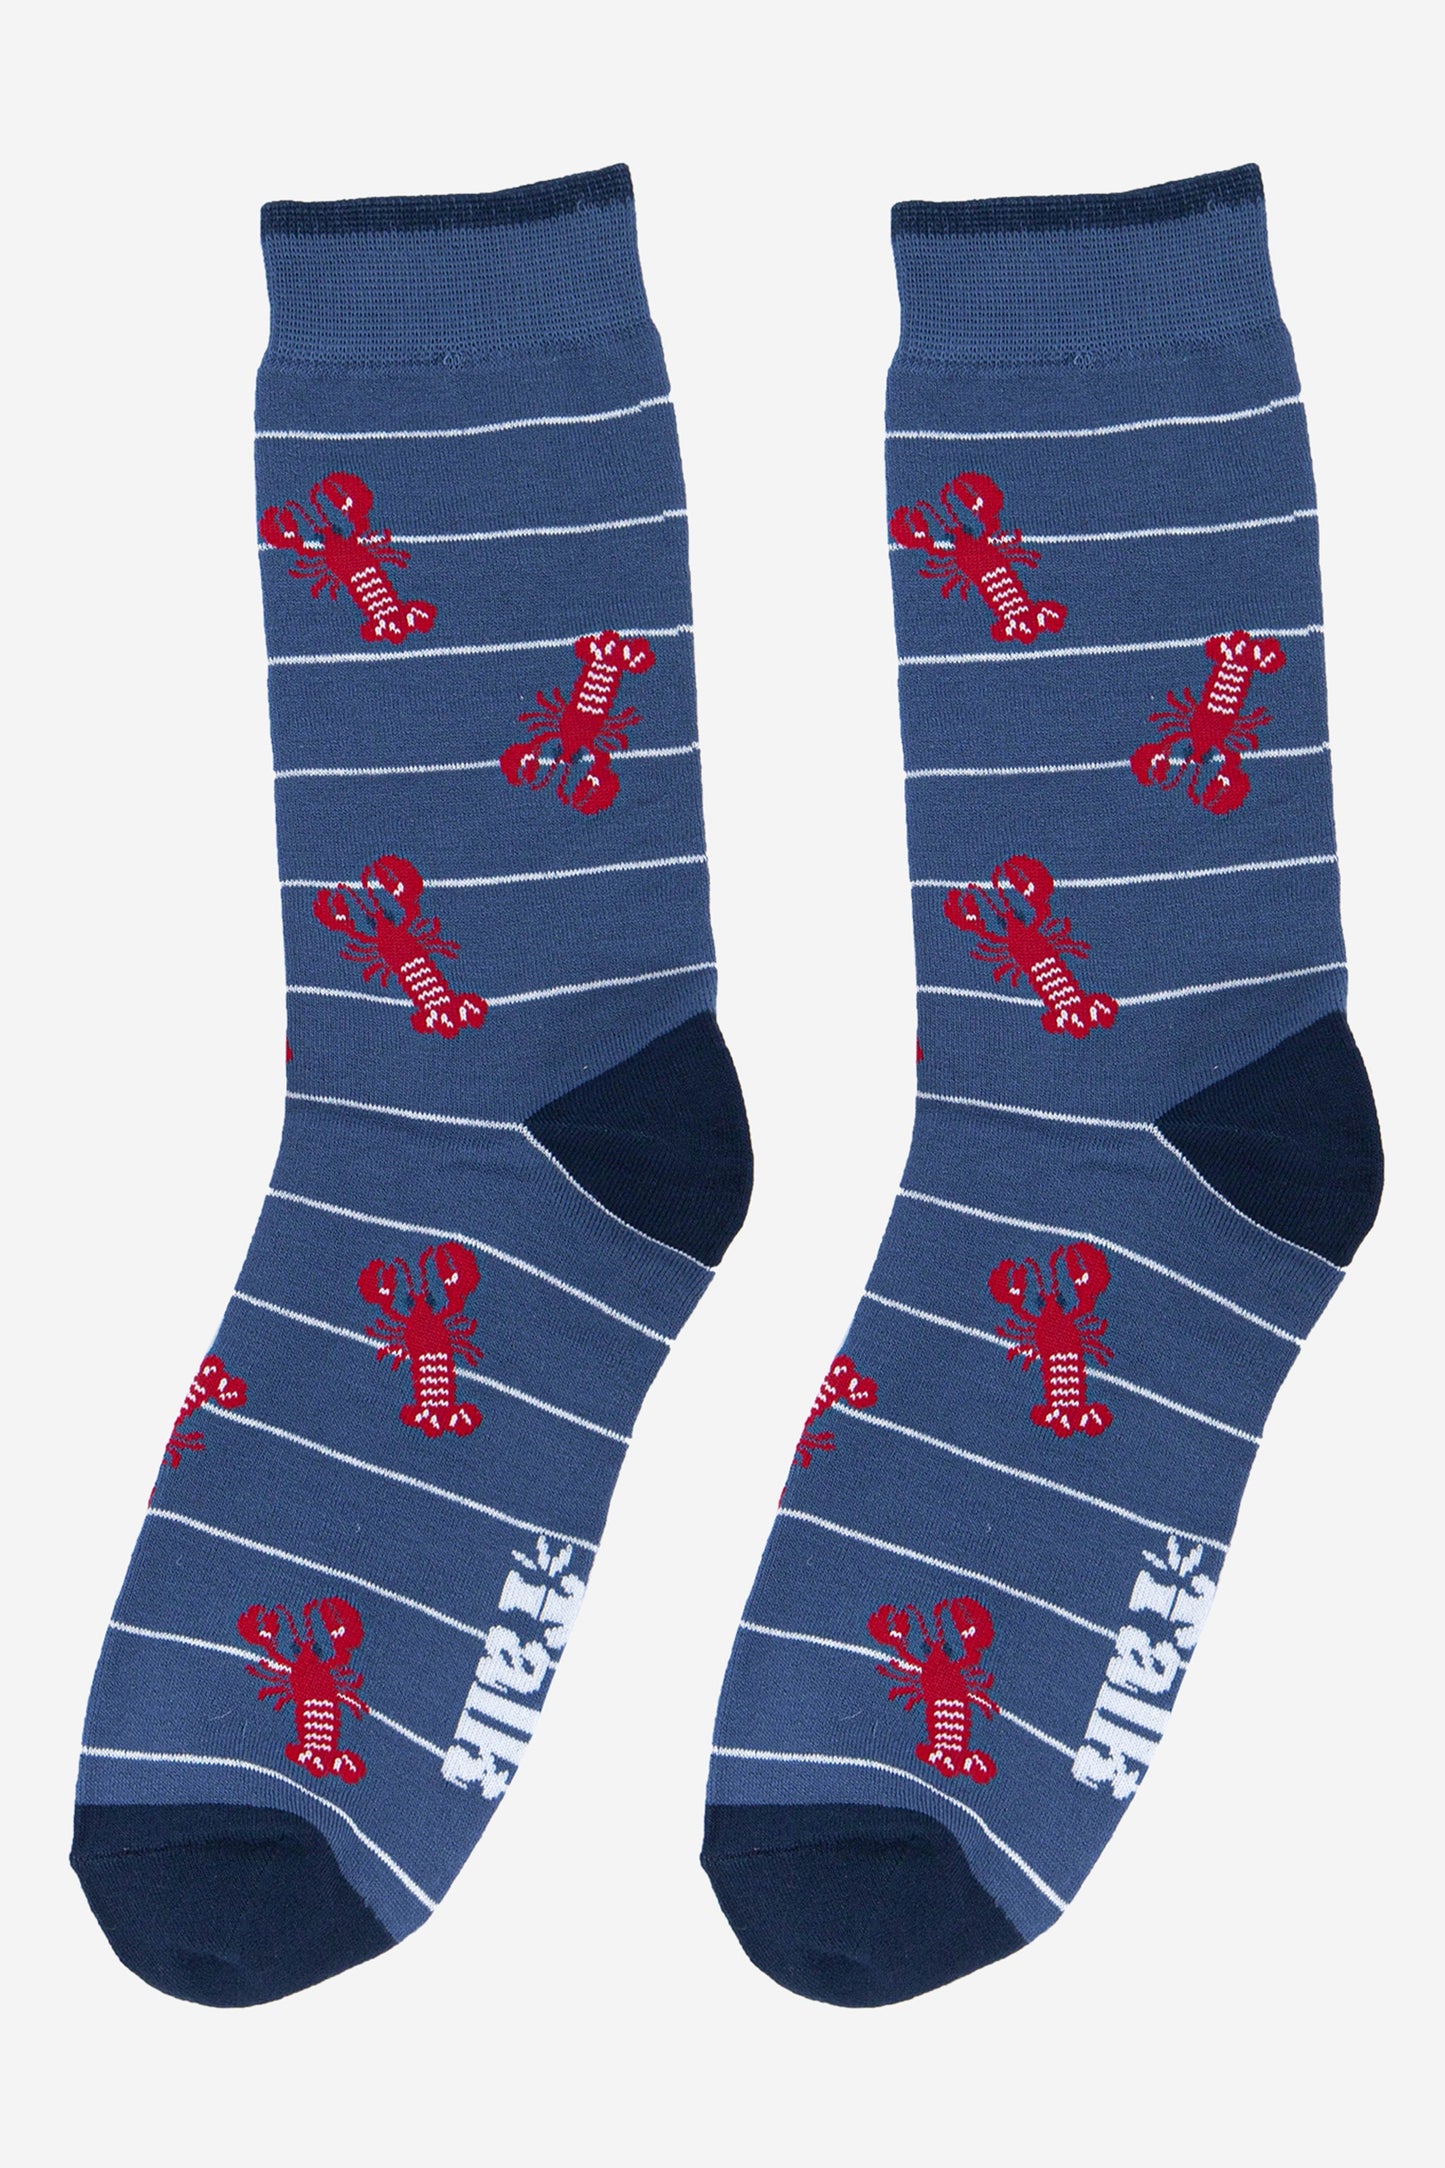 mens blue bamboo socks with an all over red lobster print